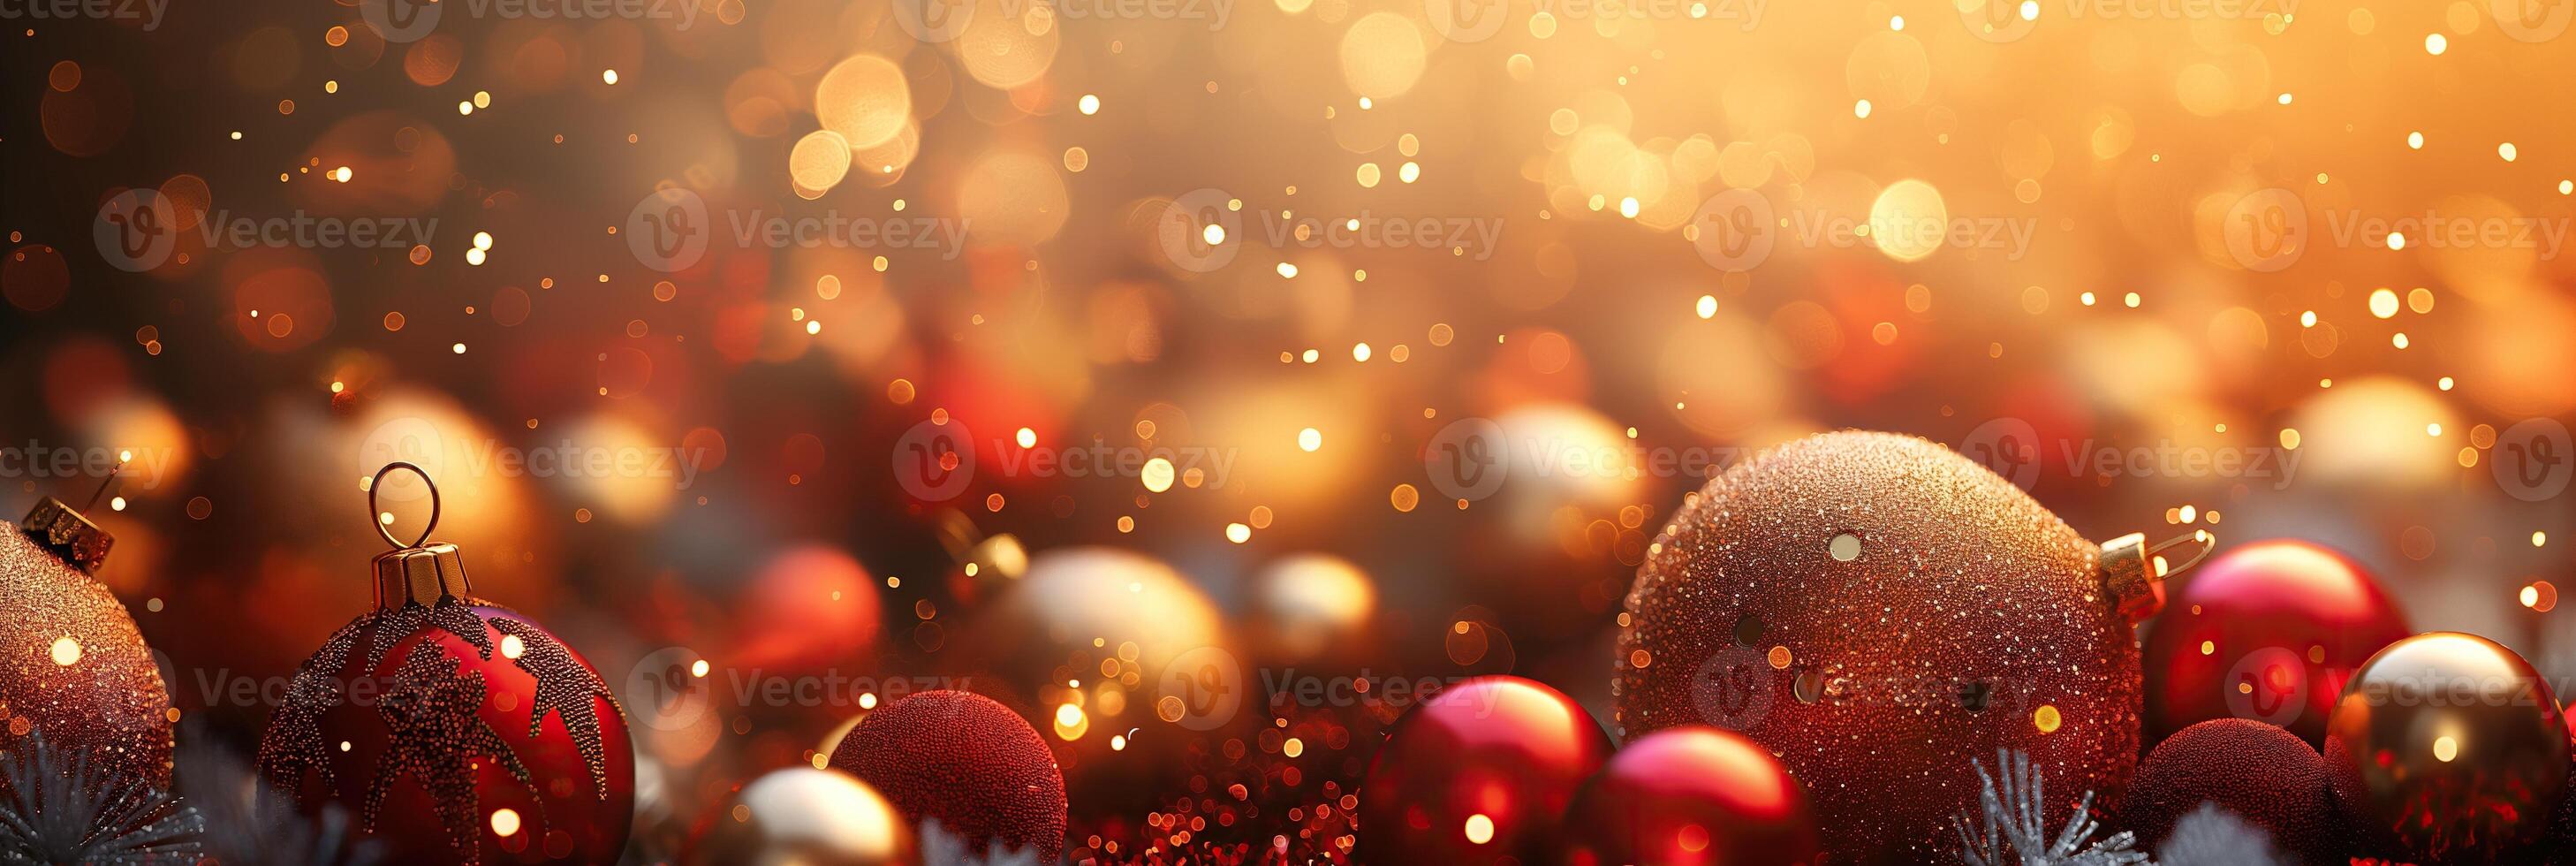 A Christmas shiny banner with many red and gold festive elements photo